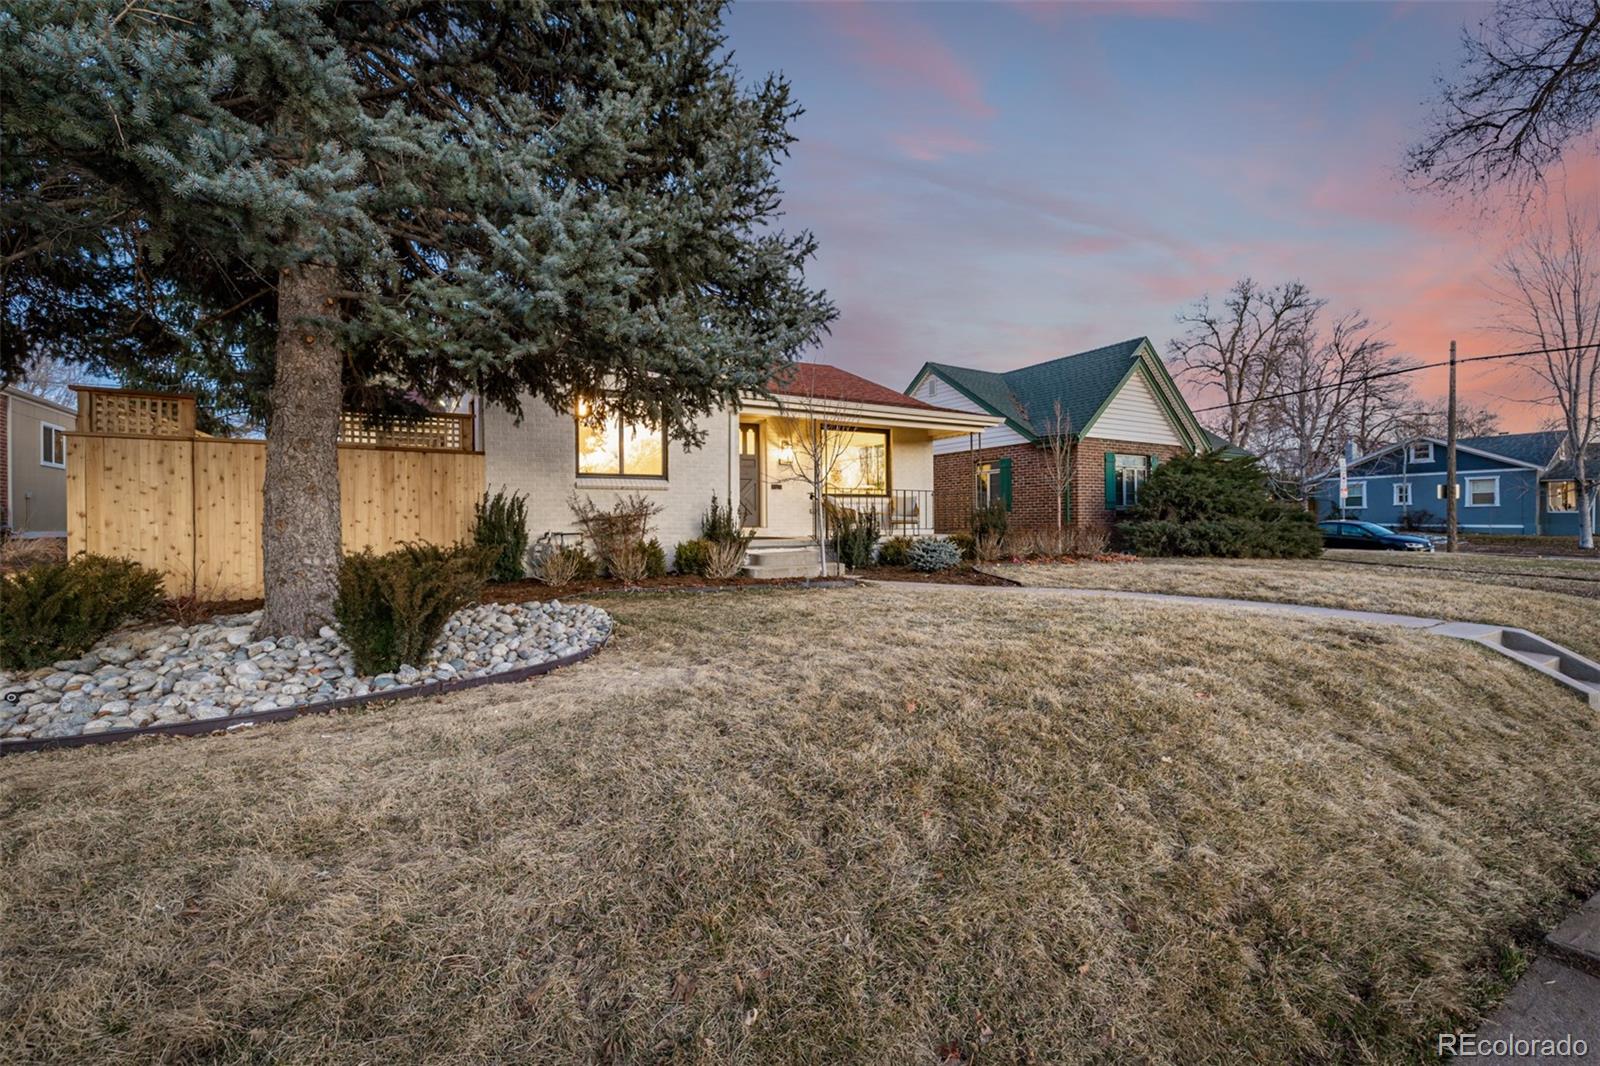 1690 s downing street, Denver sold home. Closed on 2024-03-22 for $1,070,065.